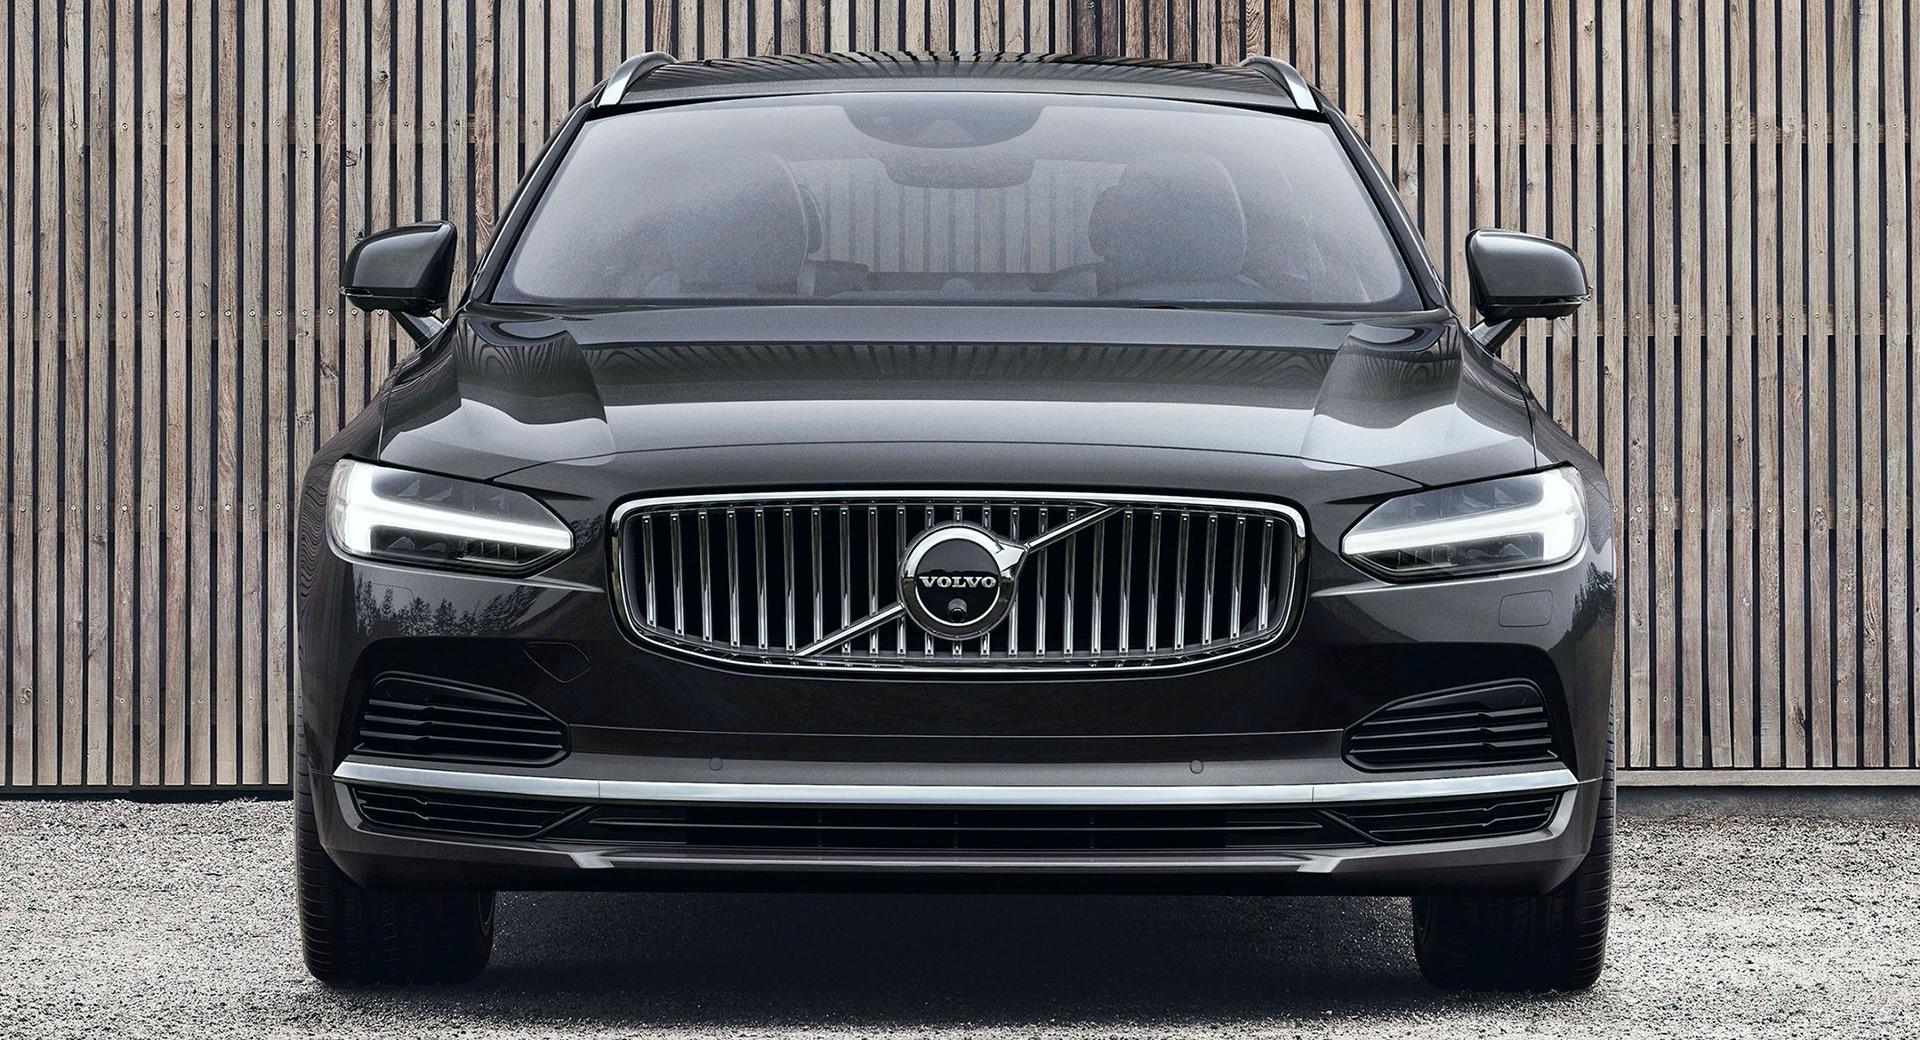 There's A Facelift Hidden Somewhere On The 2021 Volvo S90 And V90 |  Carscoops